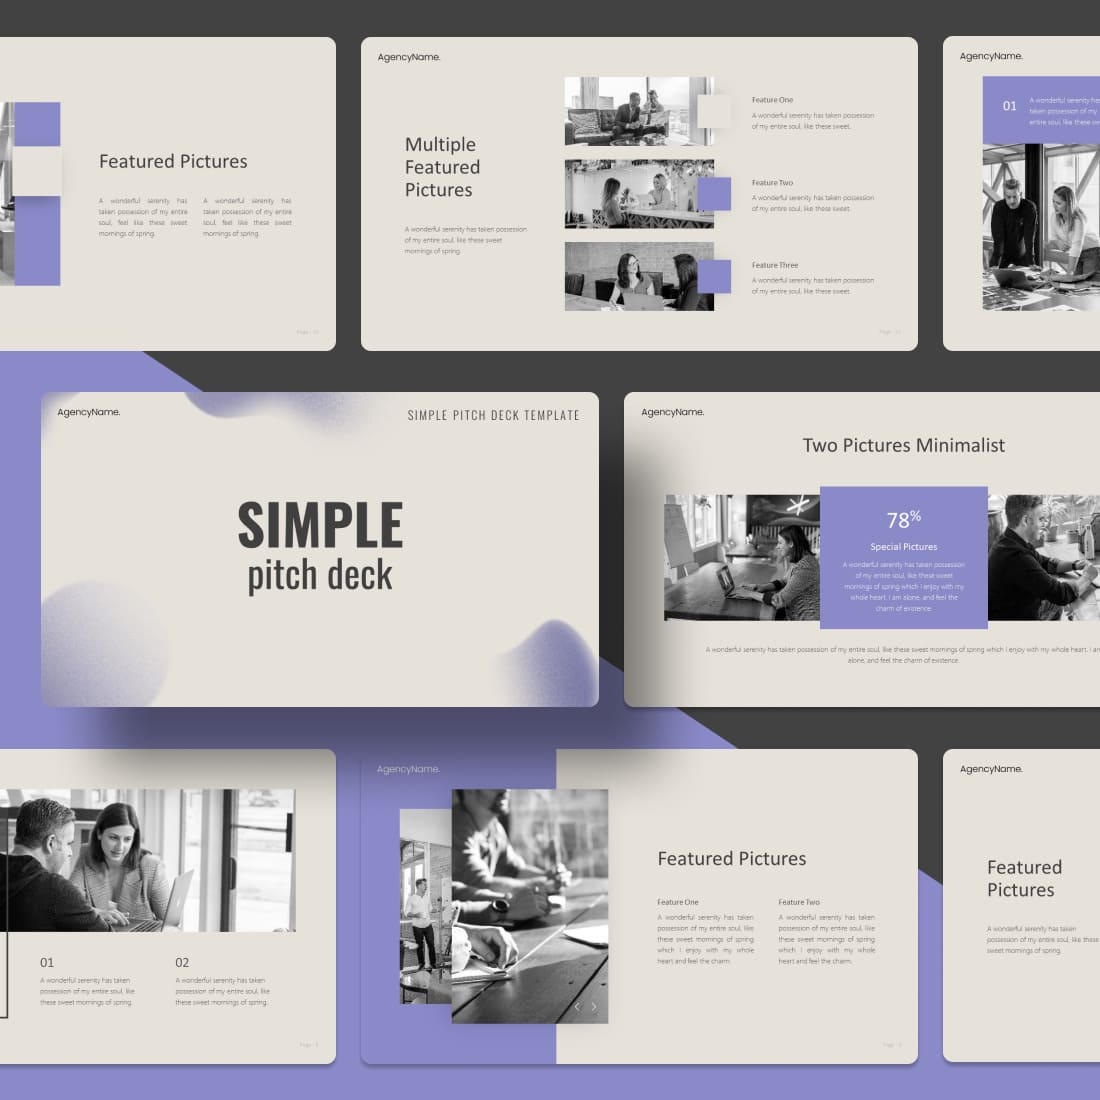 Simple Pitch Deck Keynote Template cover.